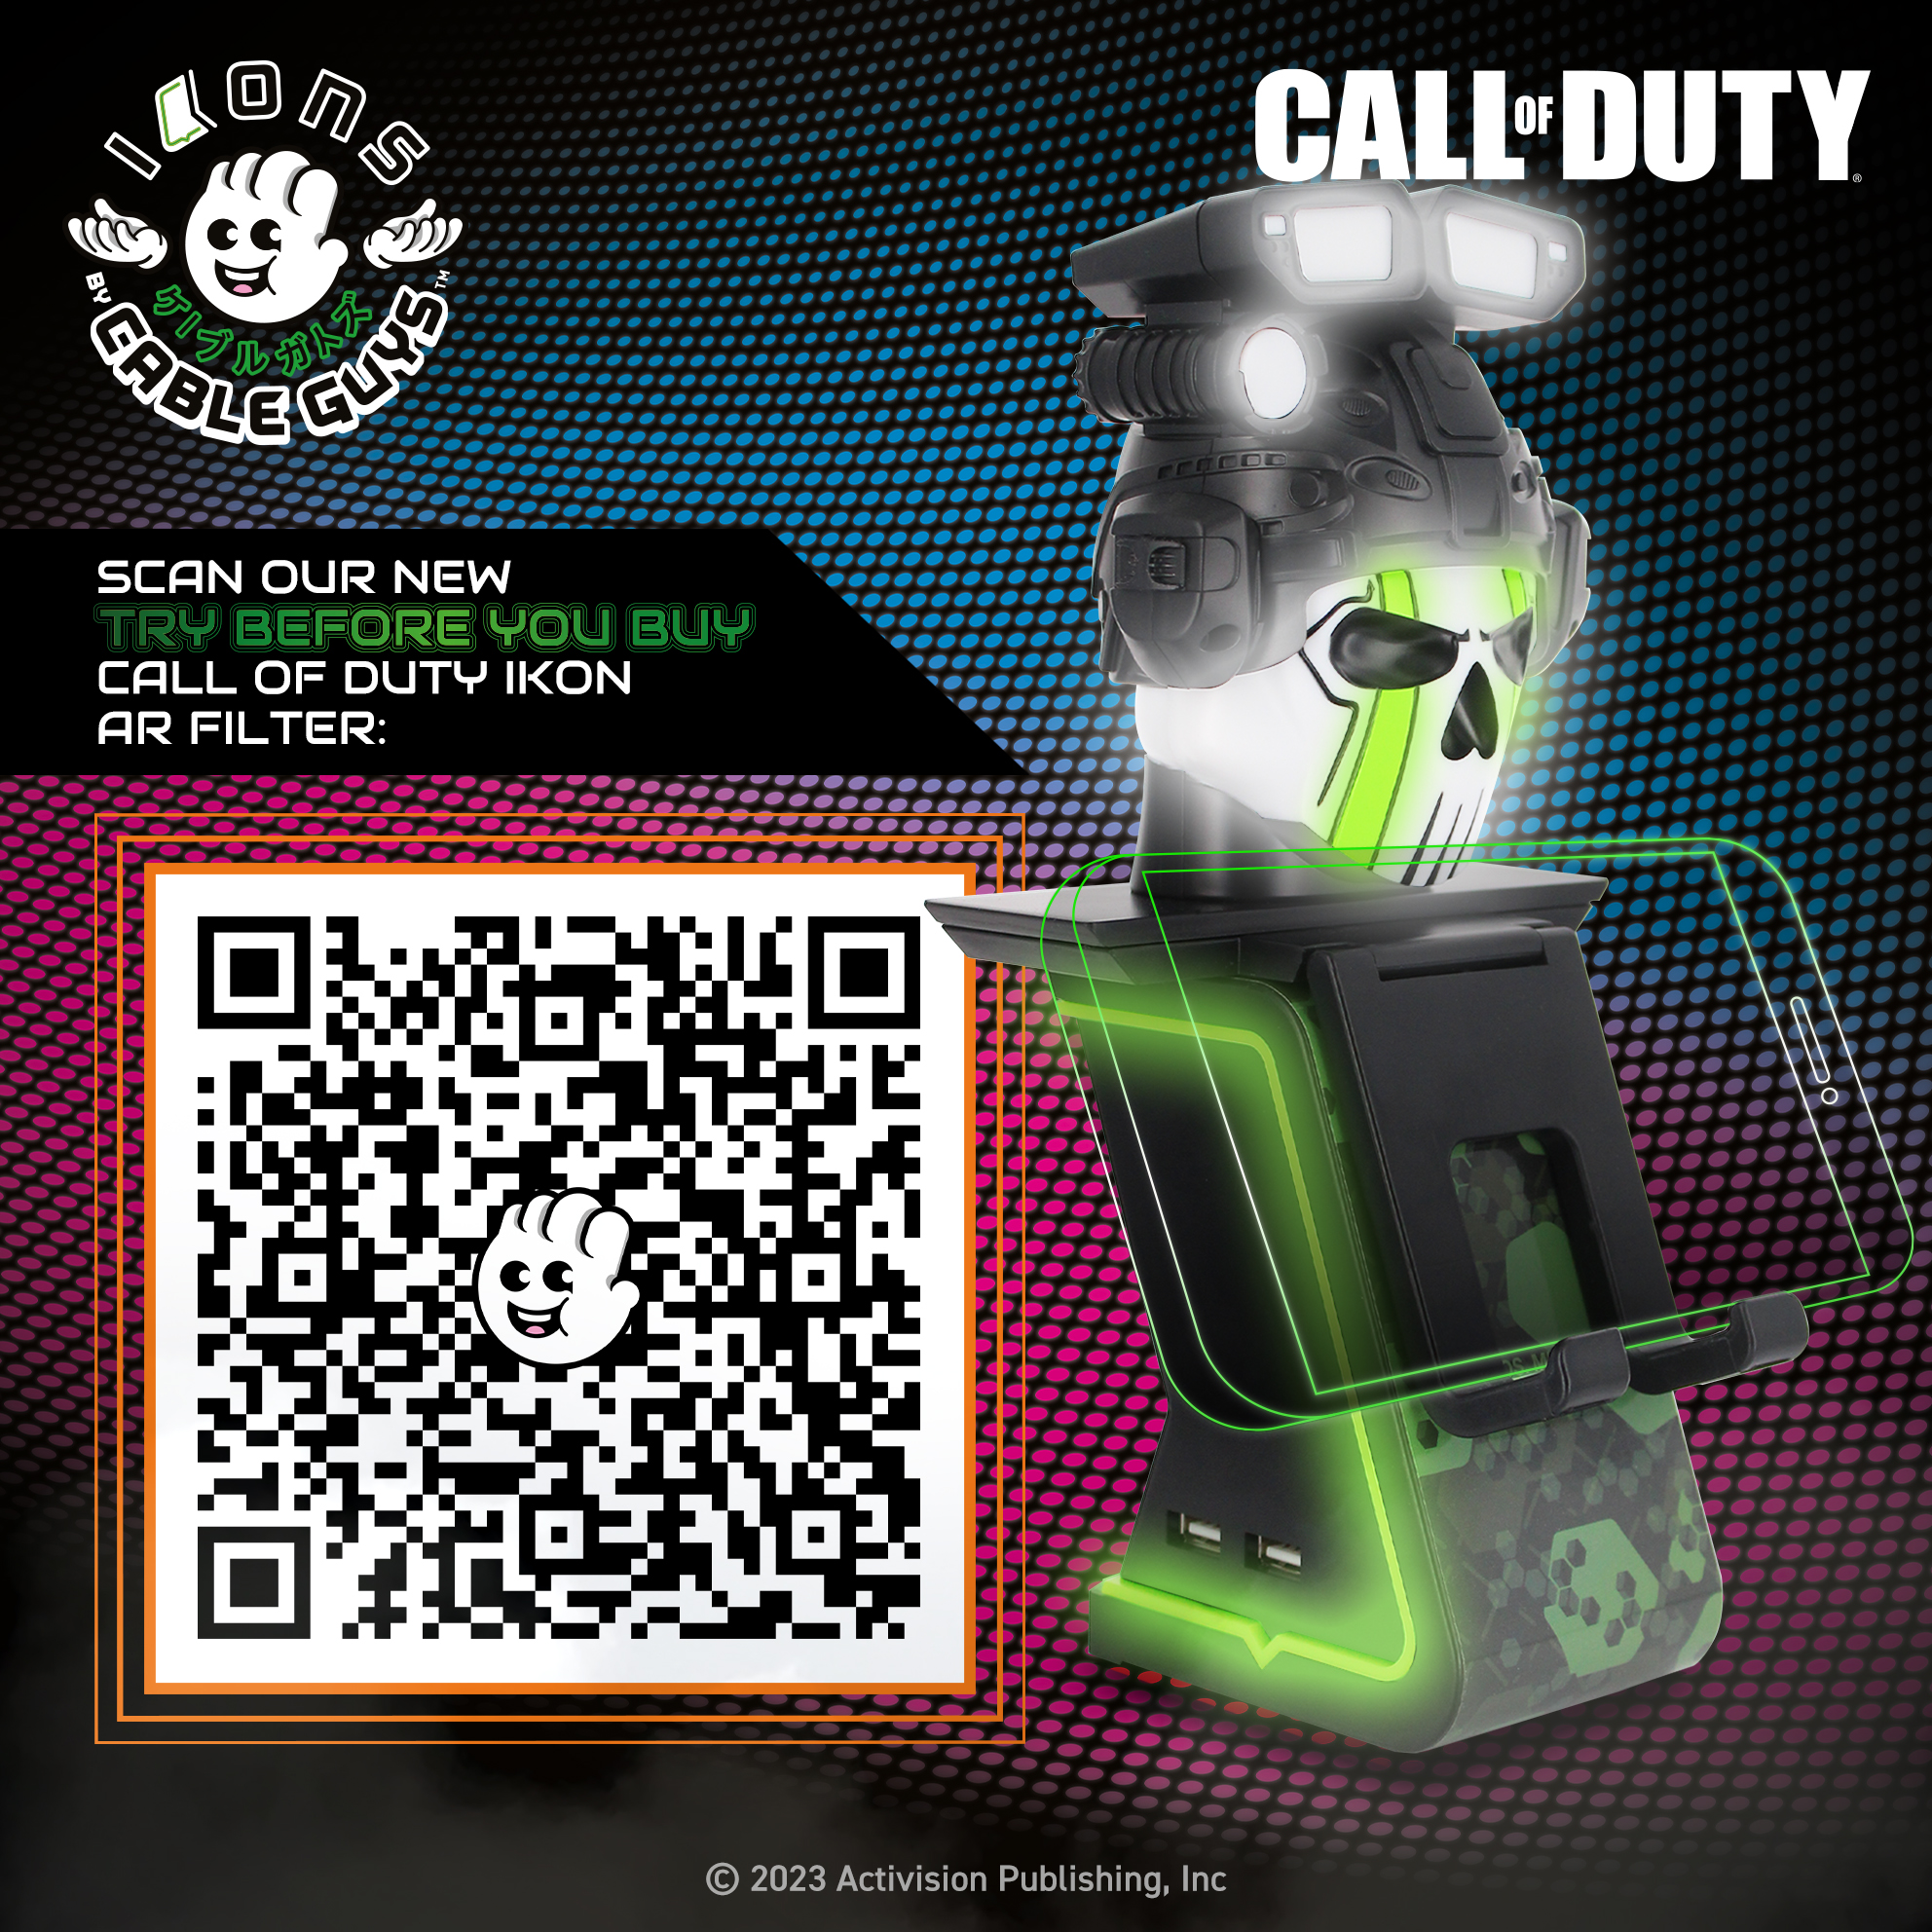 Call of Duty Ghost Cable Guy Ikons Light Up Gaming Controller and Mobile  Phone Charger from Exquisite Gaming 